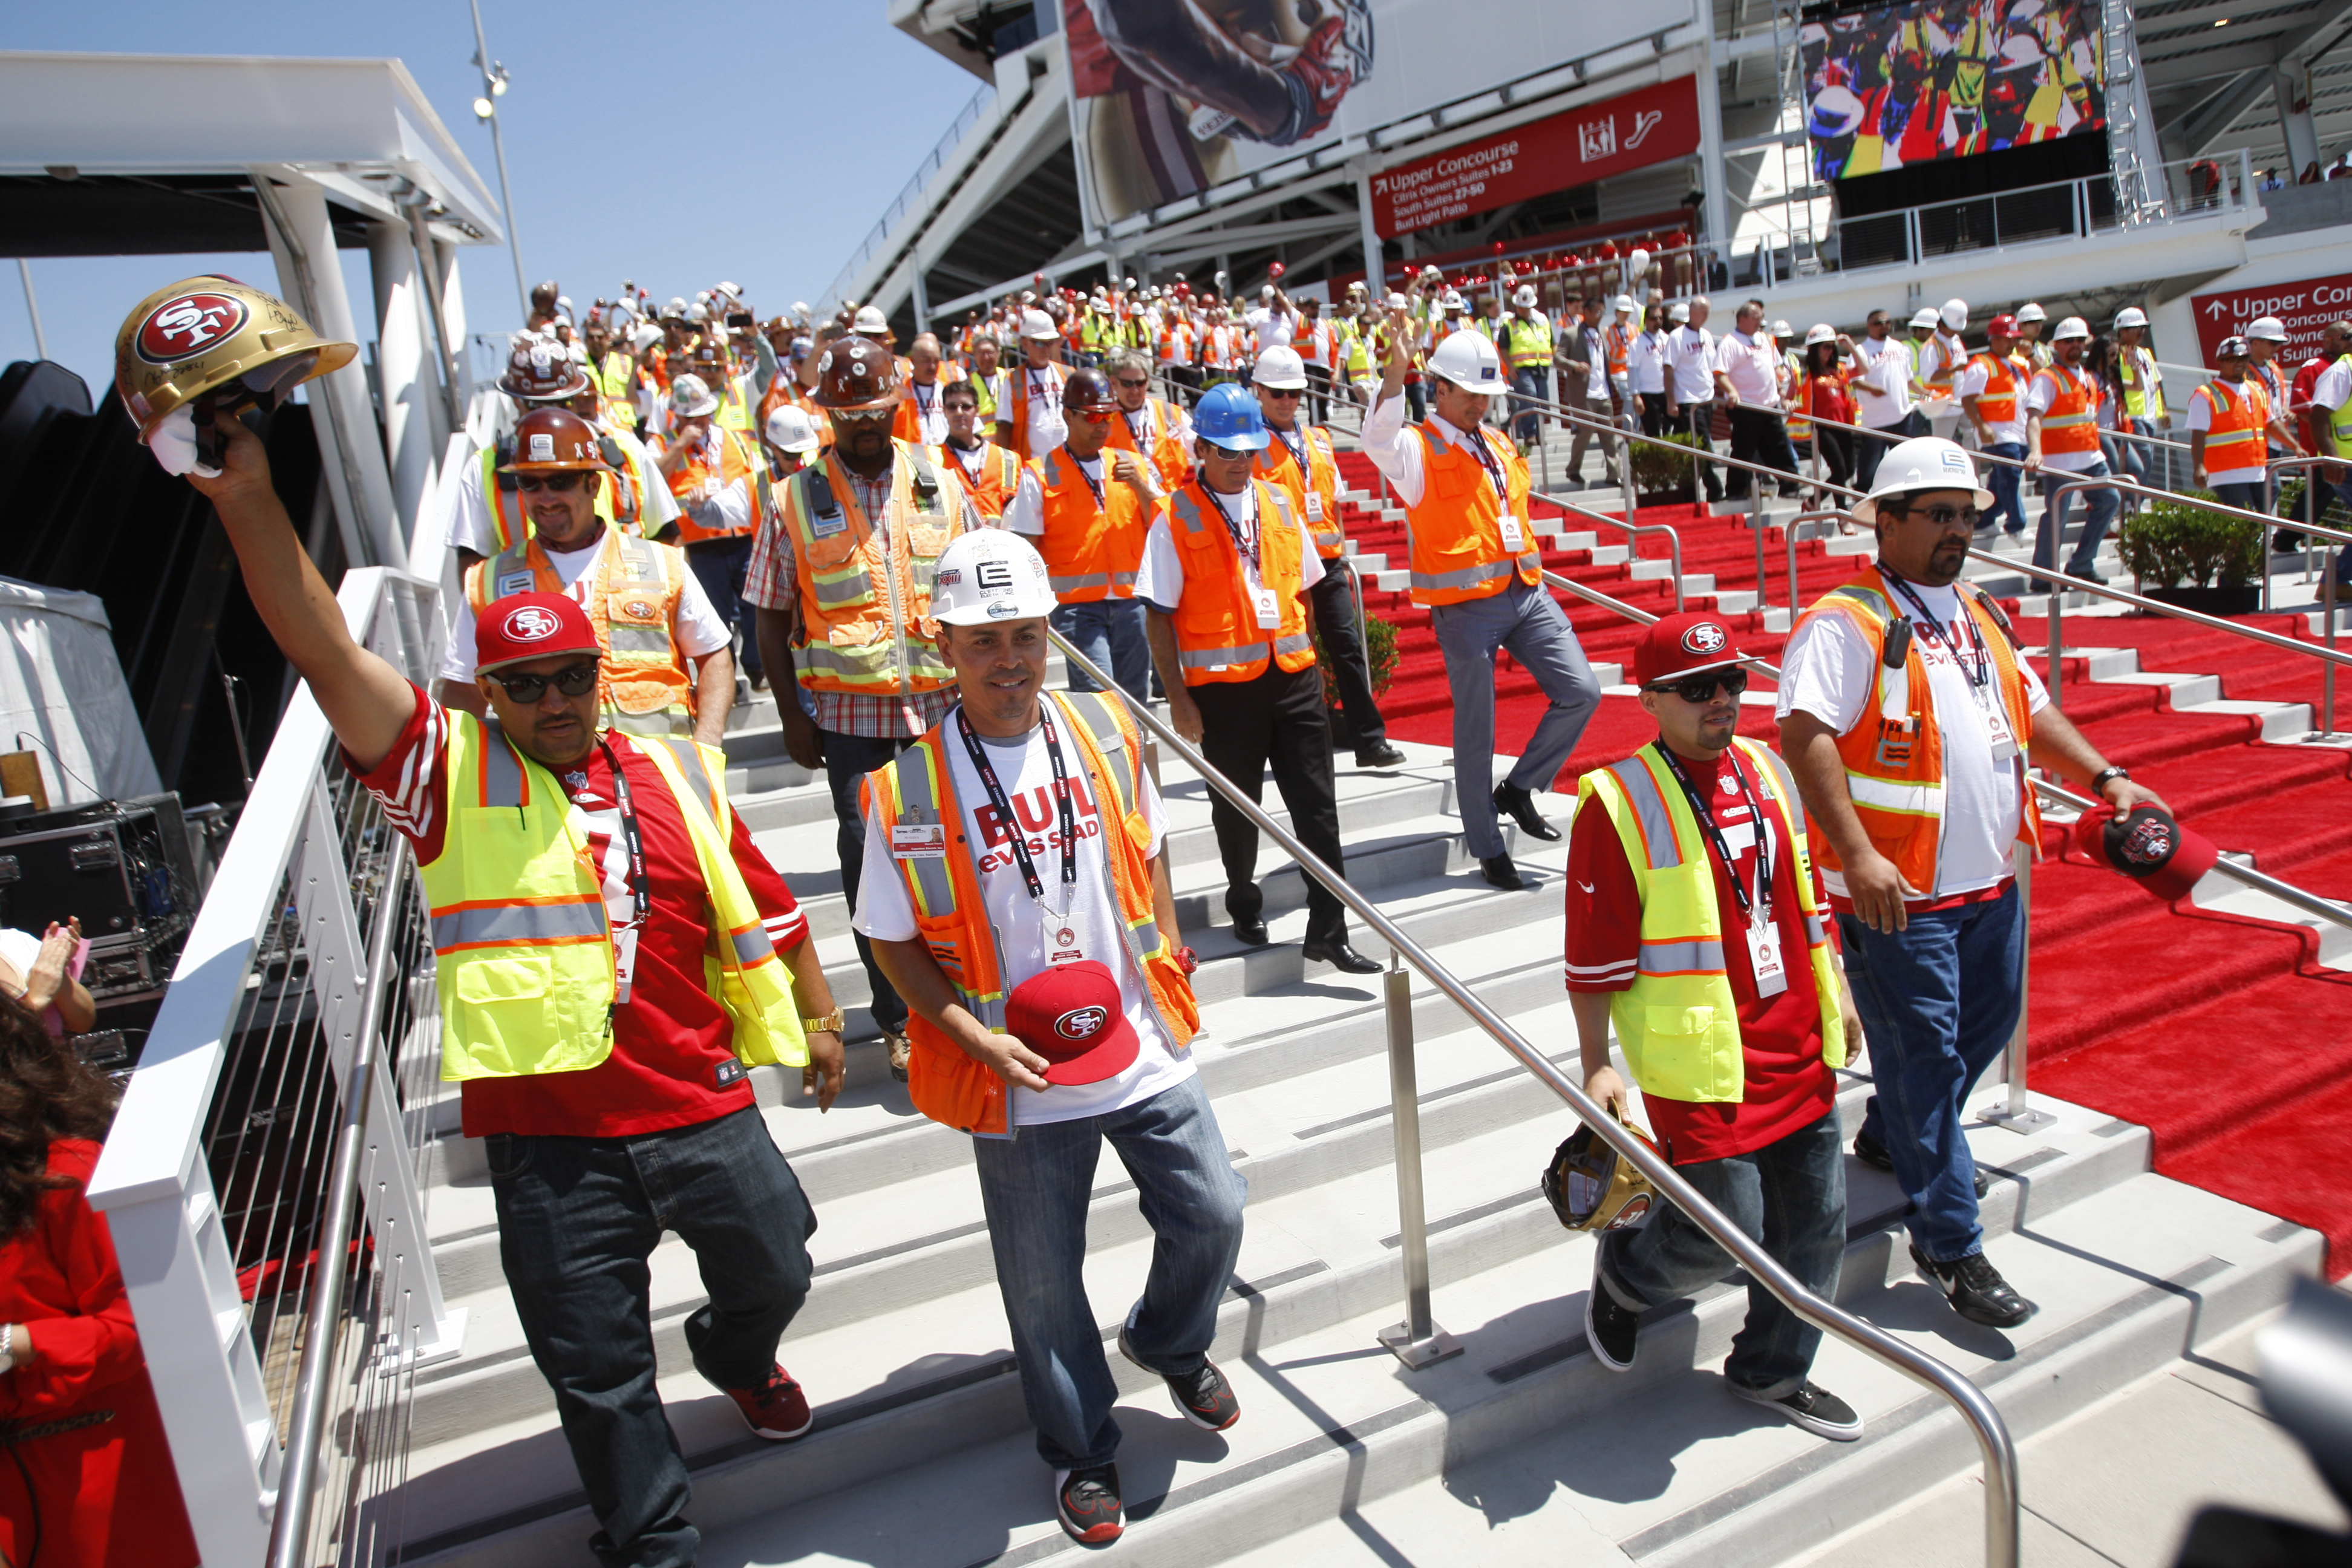 Workers head down the stairs during the Ribbon Cutting Ceremony for Levi Stadium on July 17, 2014 in Santa Clara, California. (Michael Zagaris&mdash;Getty Images)